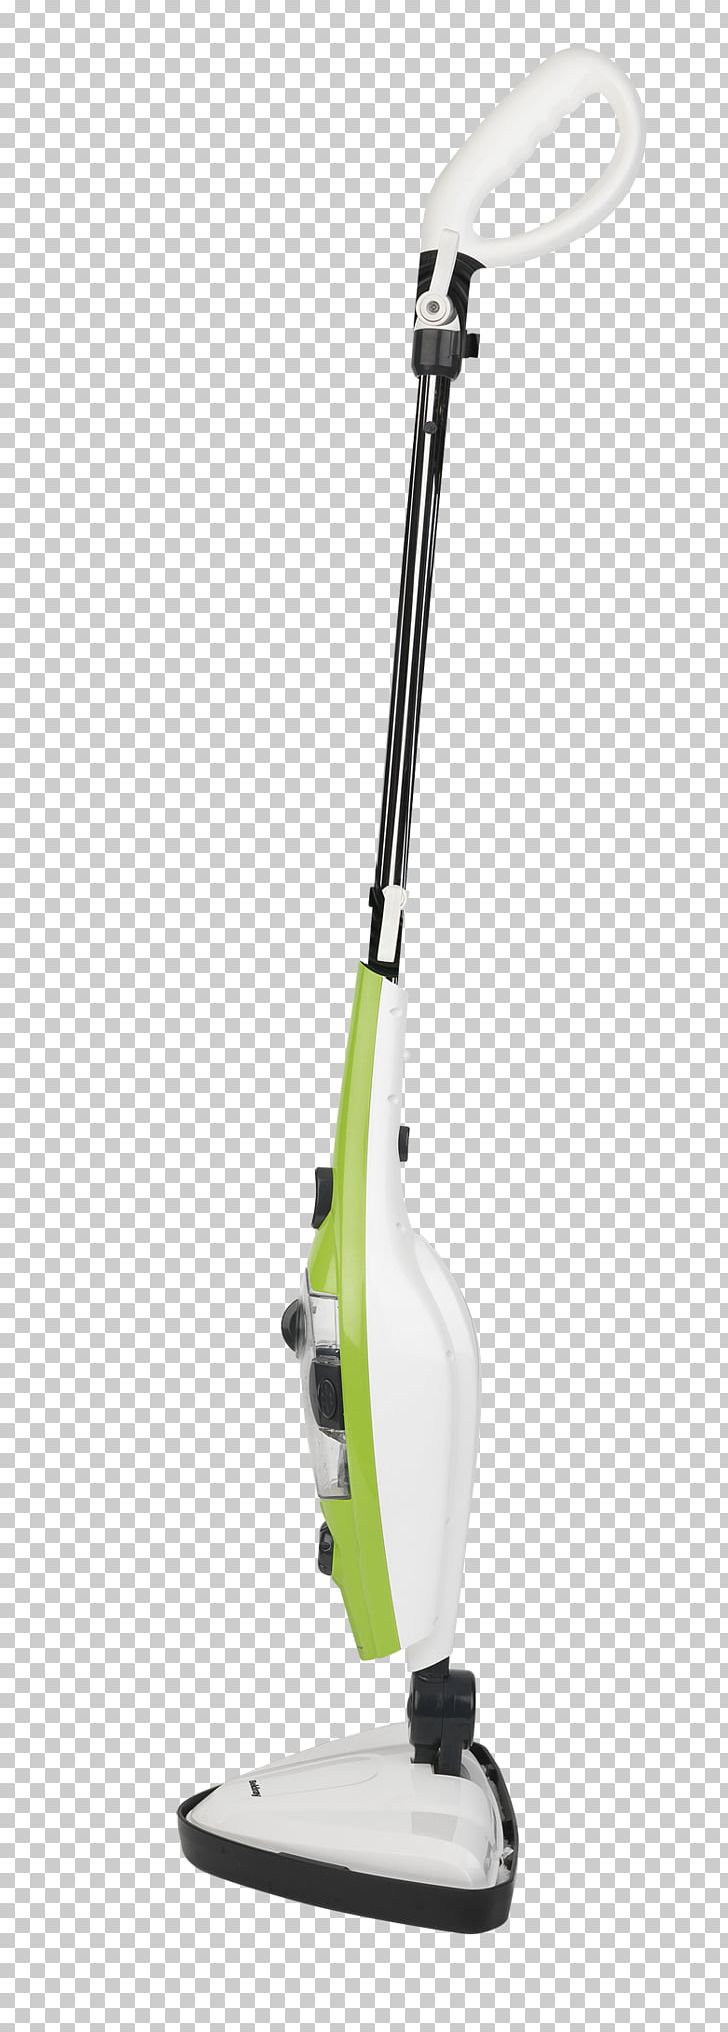 Tool Steam Mop Vacuum Cleaner Vapor Steam Cleaner PNG, Clipart, Broom, Carpet, Clean, Cleaner, Cleaning Free PNG Download